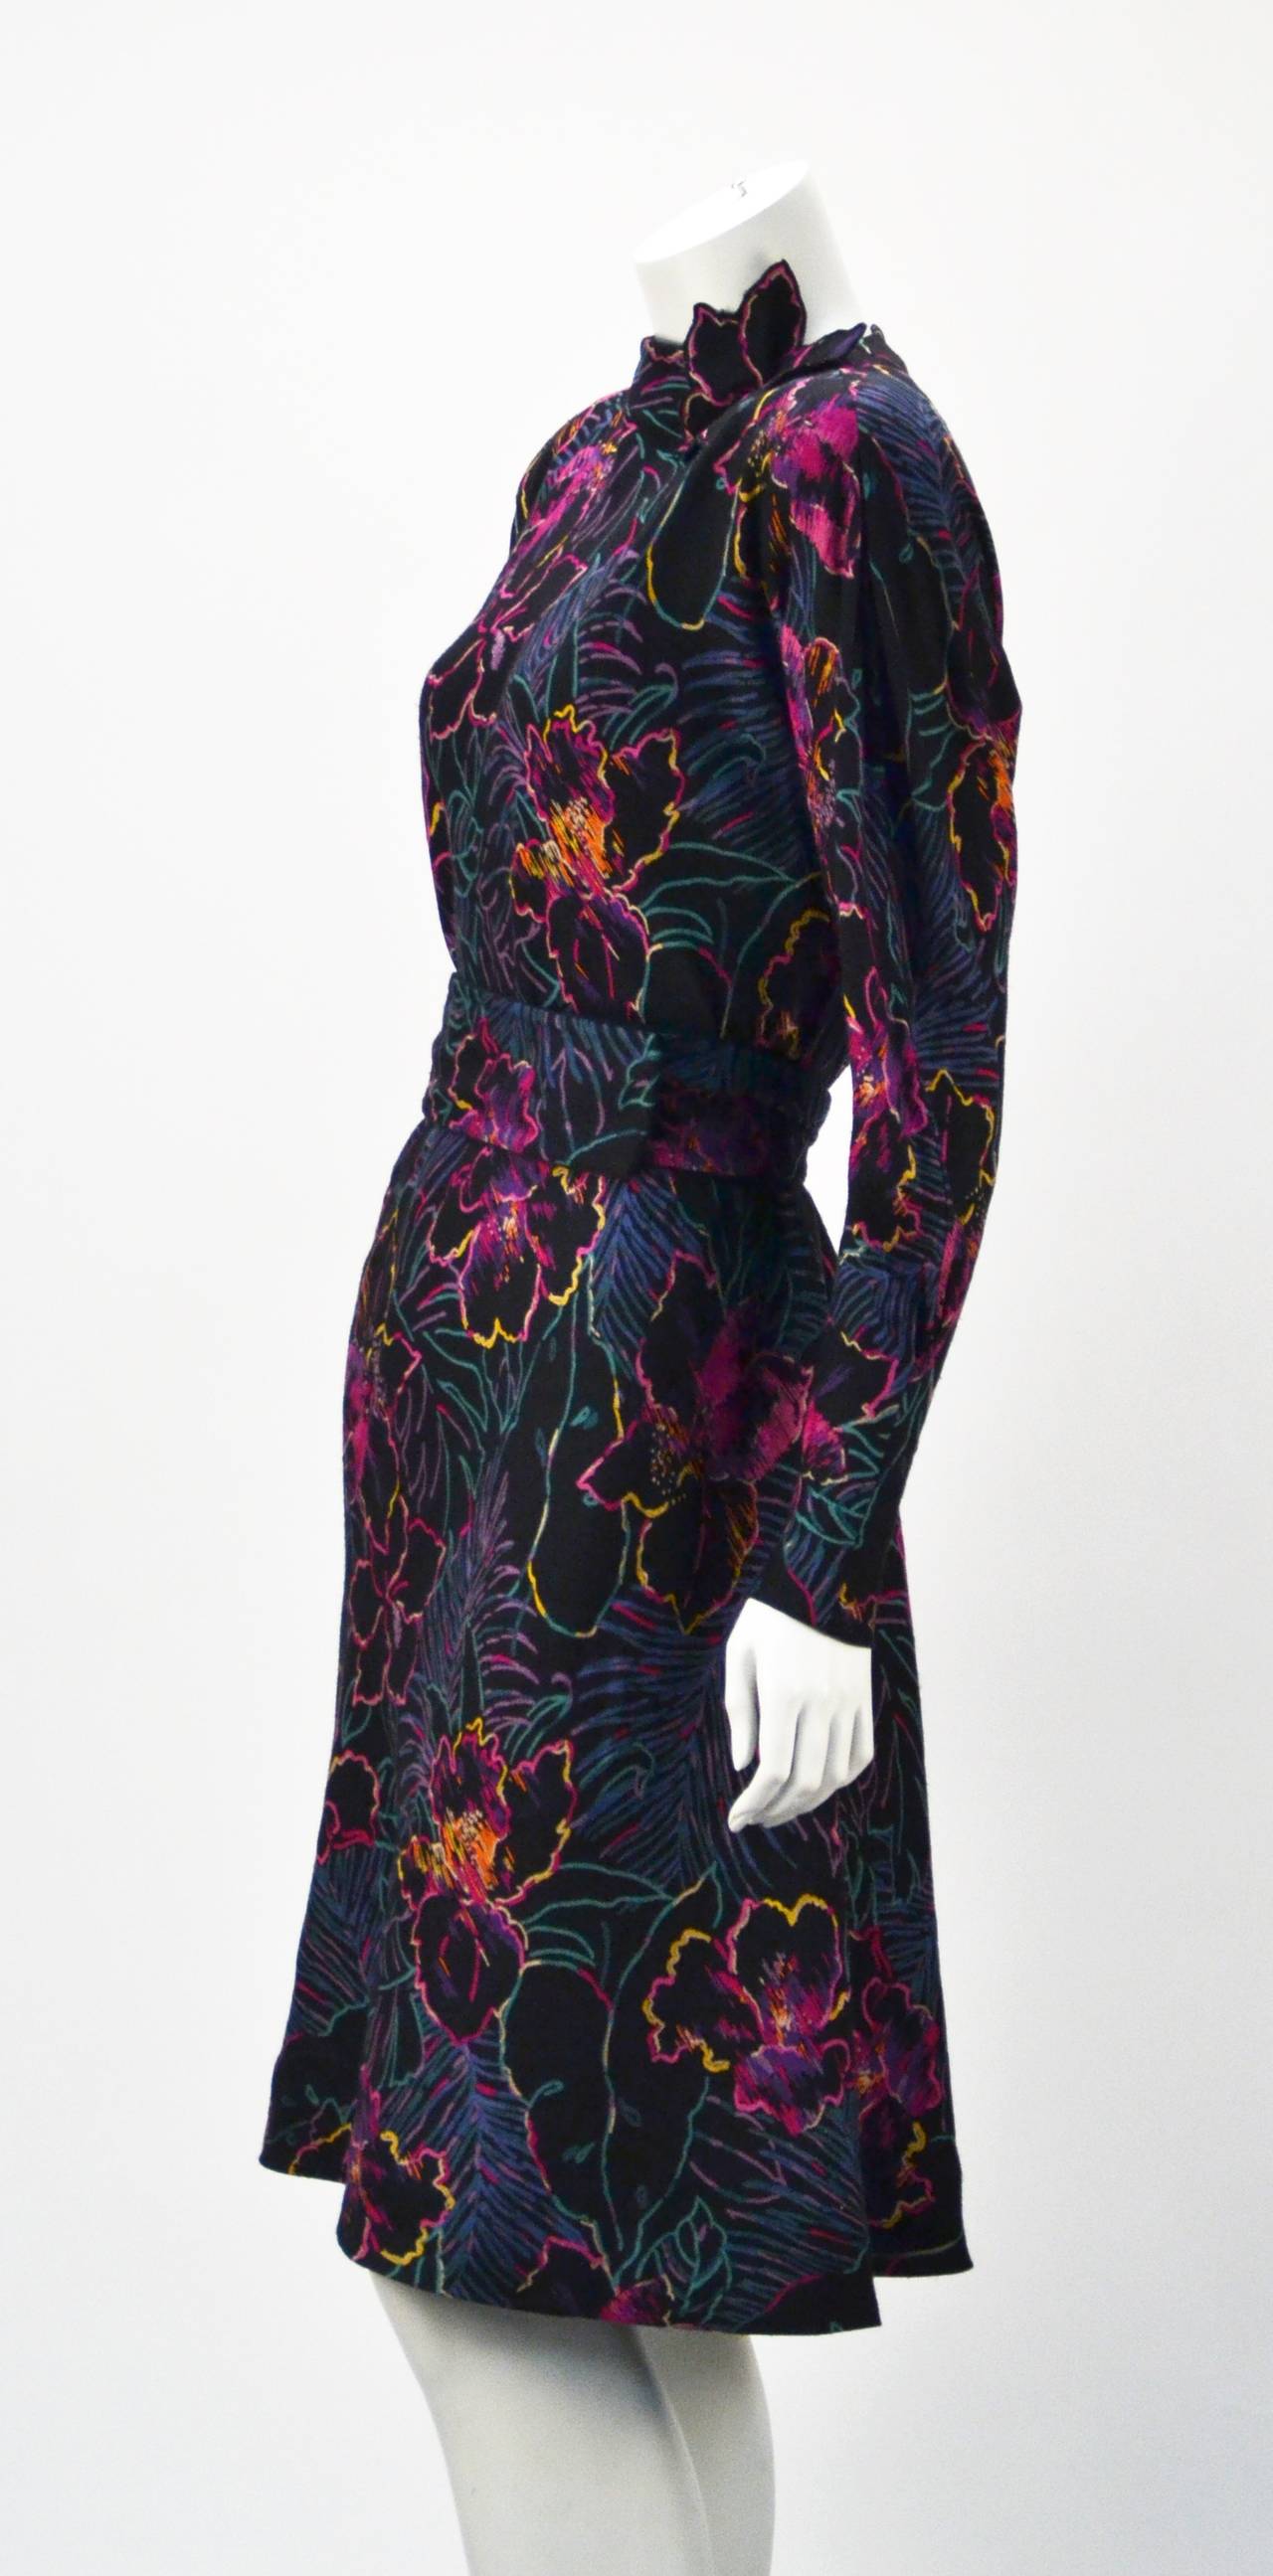 1980s Pauline Trigere Floral Print Dress In Good Condition For Sale In Houston, TX